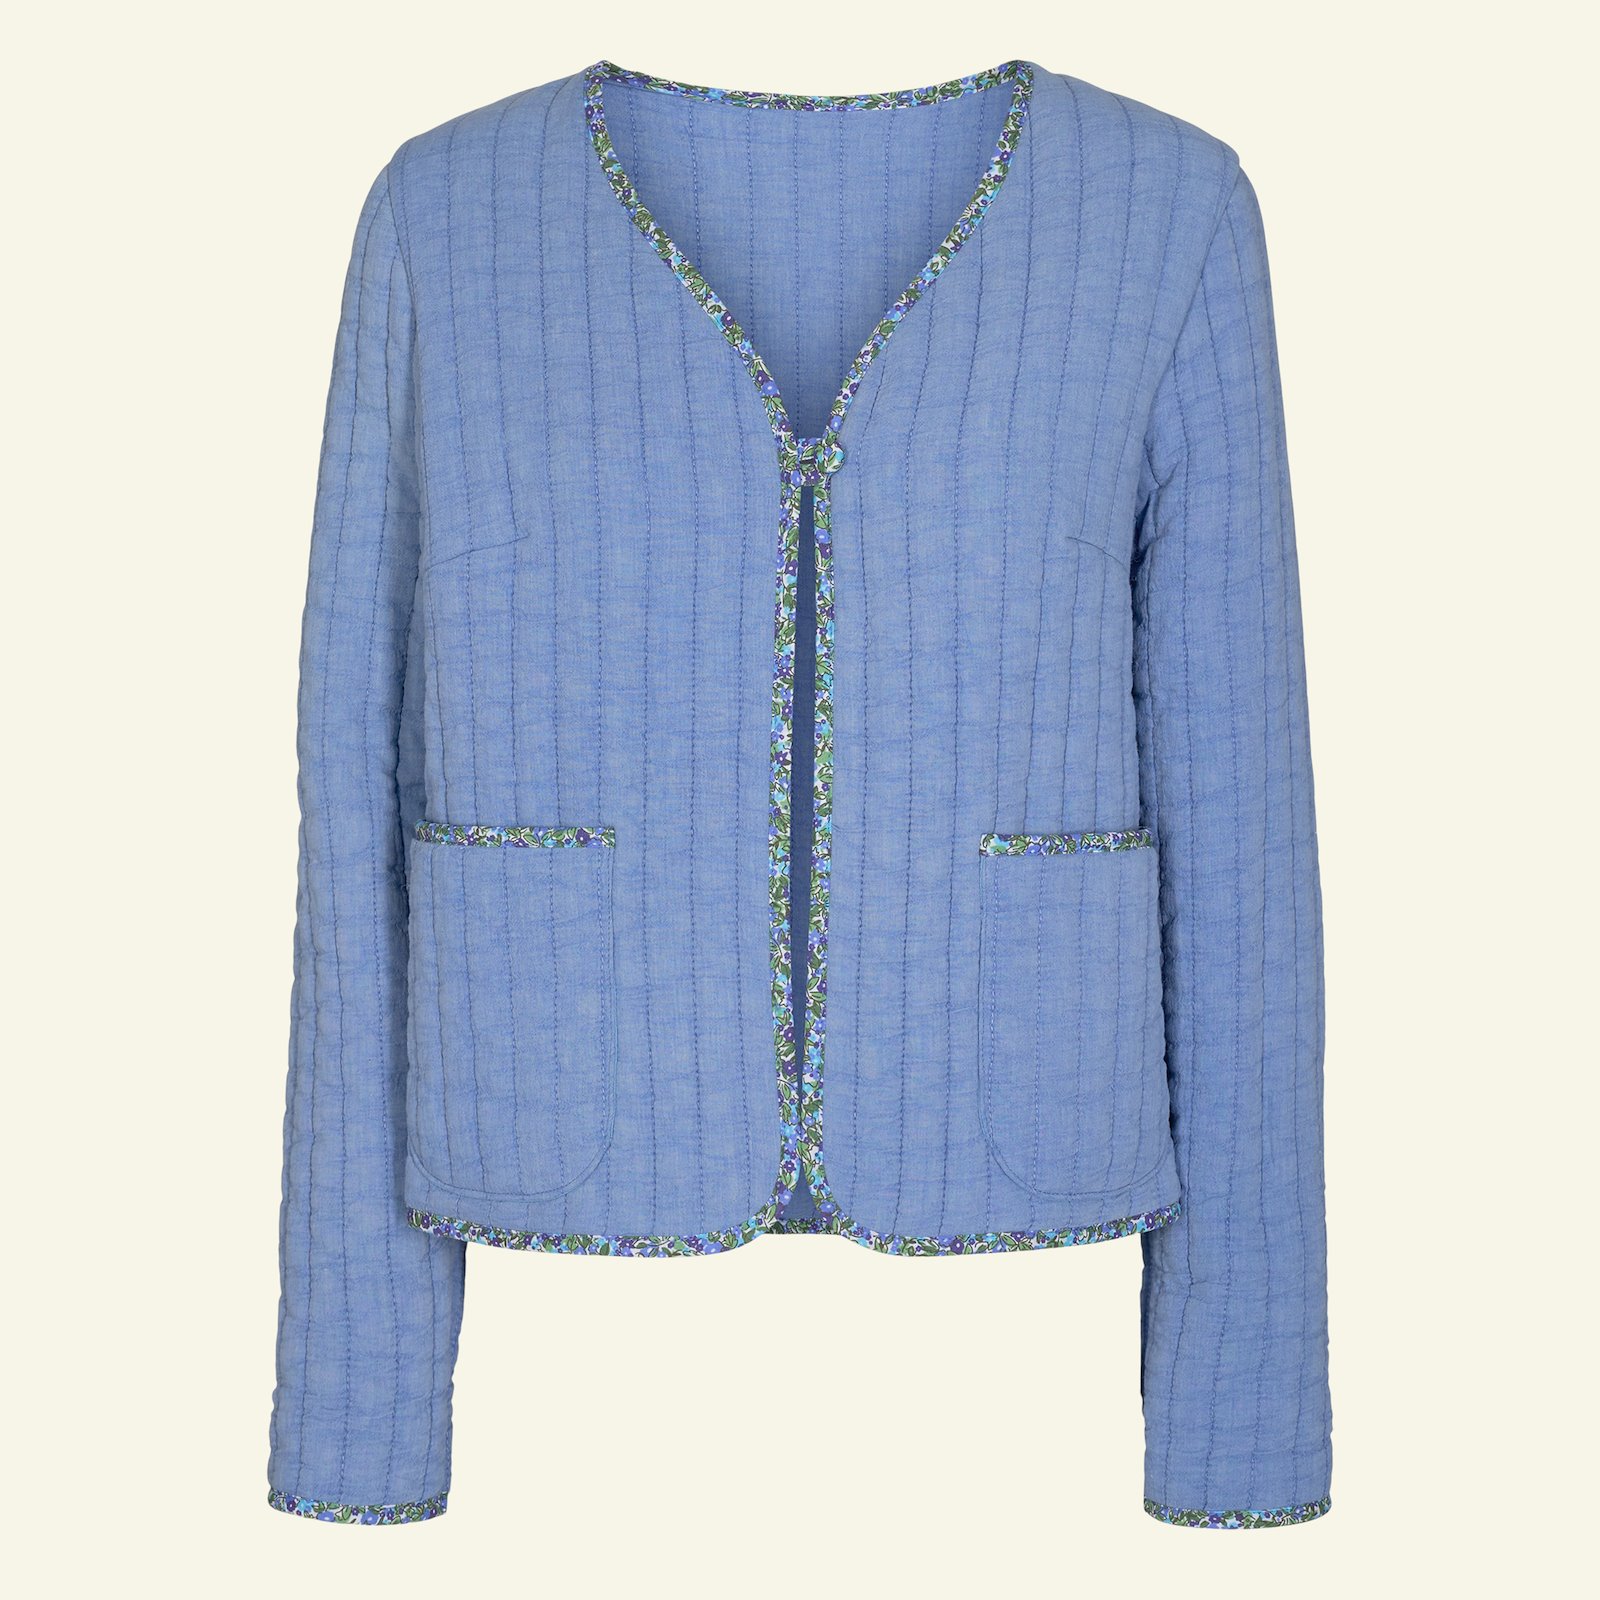 Quilted jacket and waistcoat, 36/8 p24047_920229_64110_43507_sskit